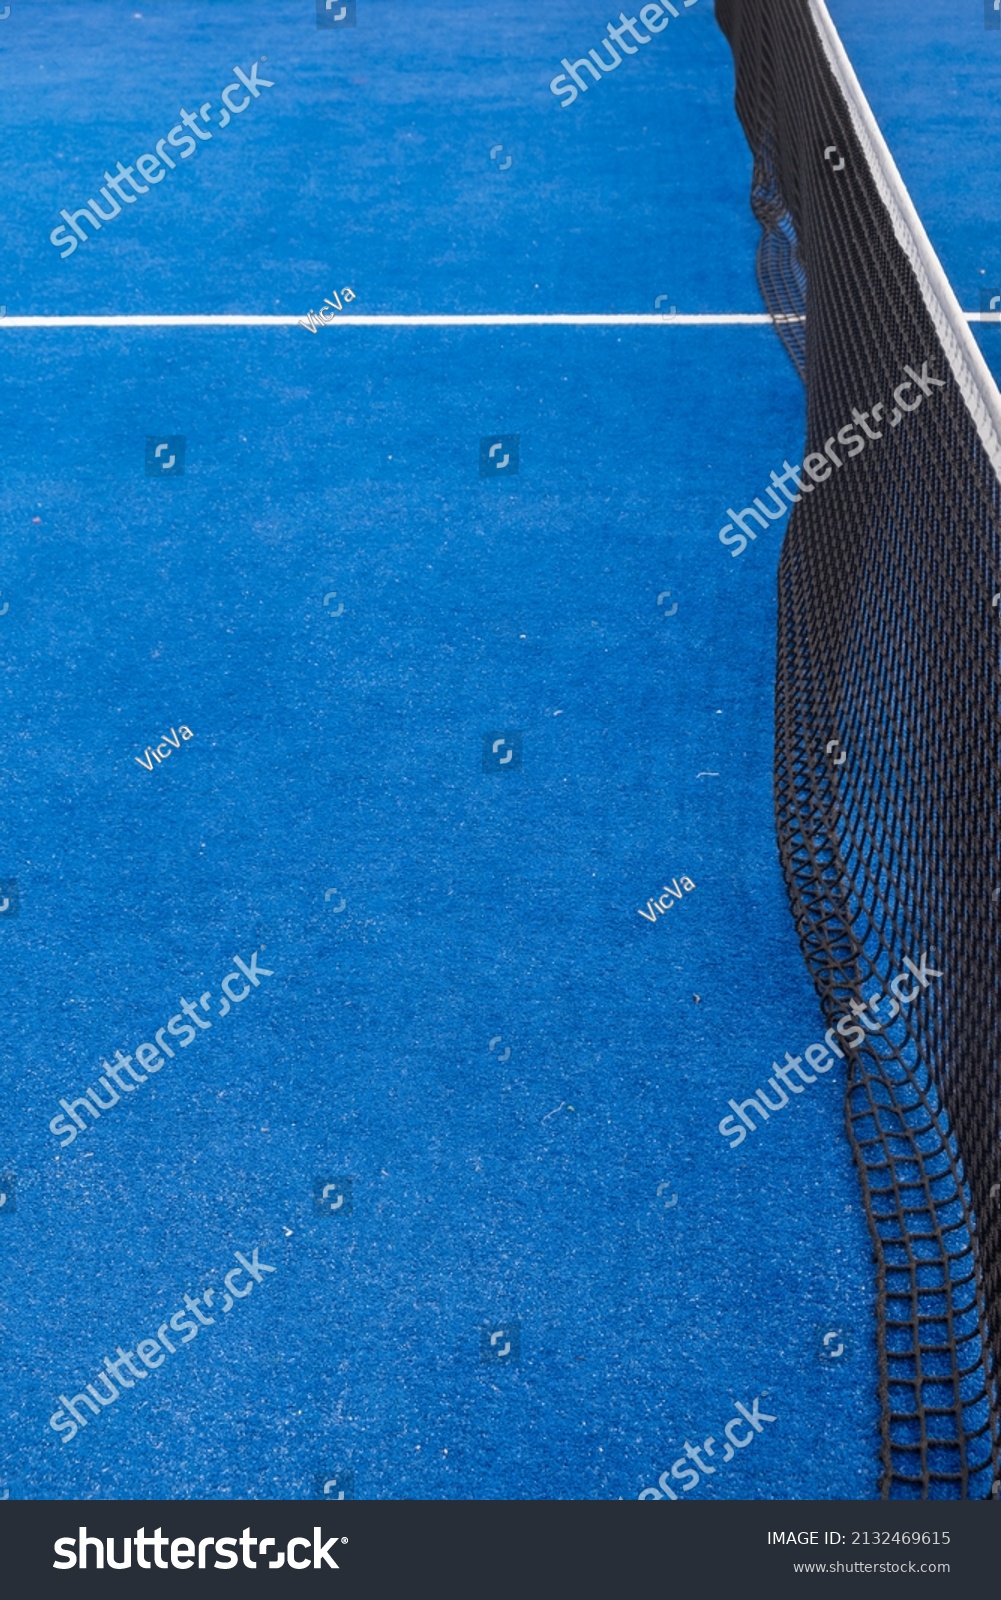 Paddle tennis and tennis court on the blue court. Tennis competition concept. Horizontal sports poster, greeting cards, headers, website. #2132469615